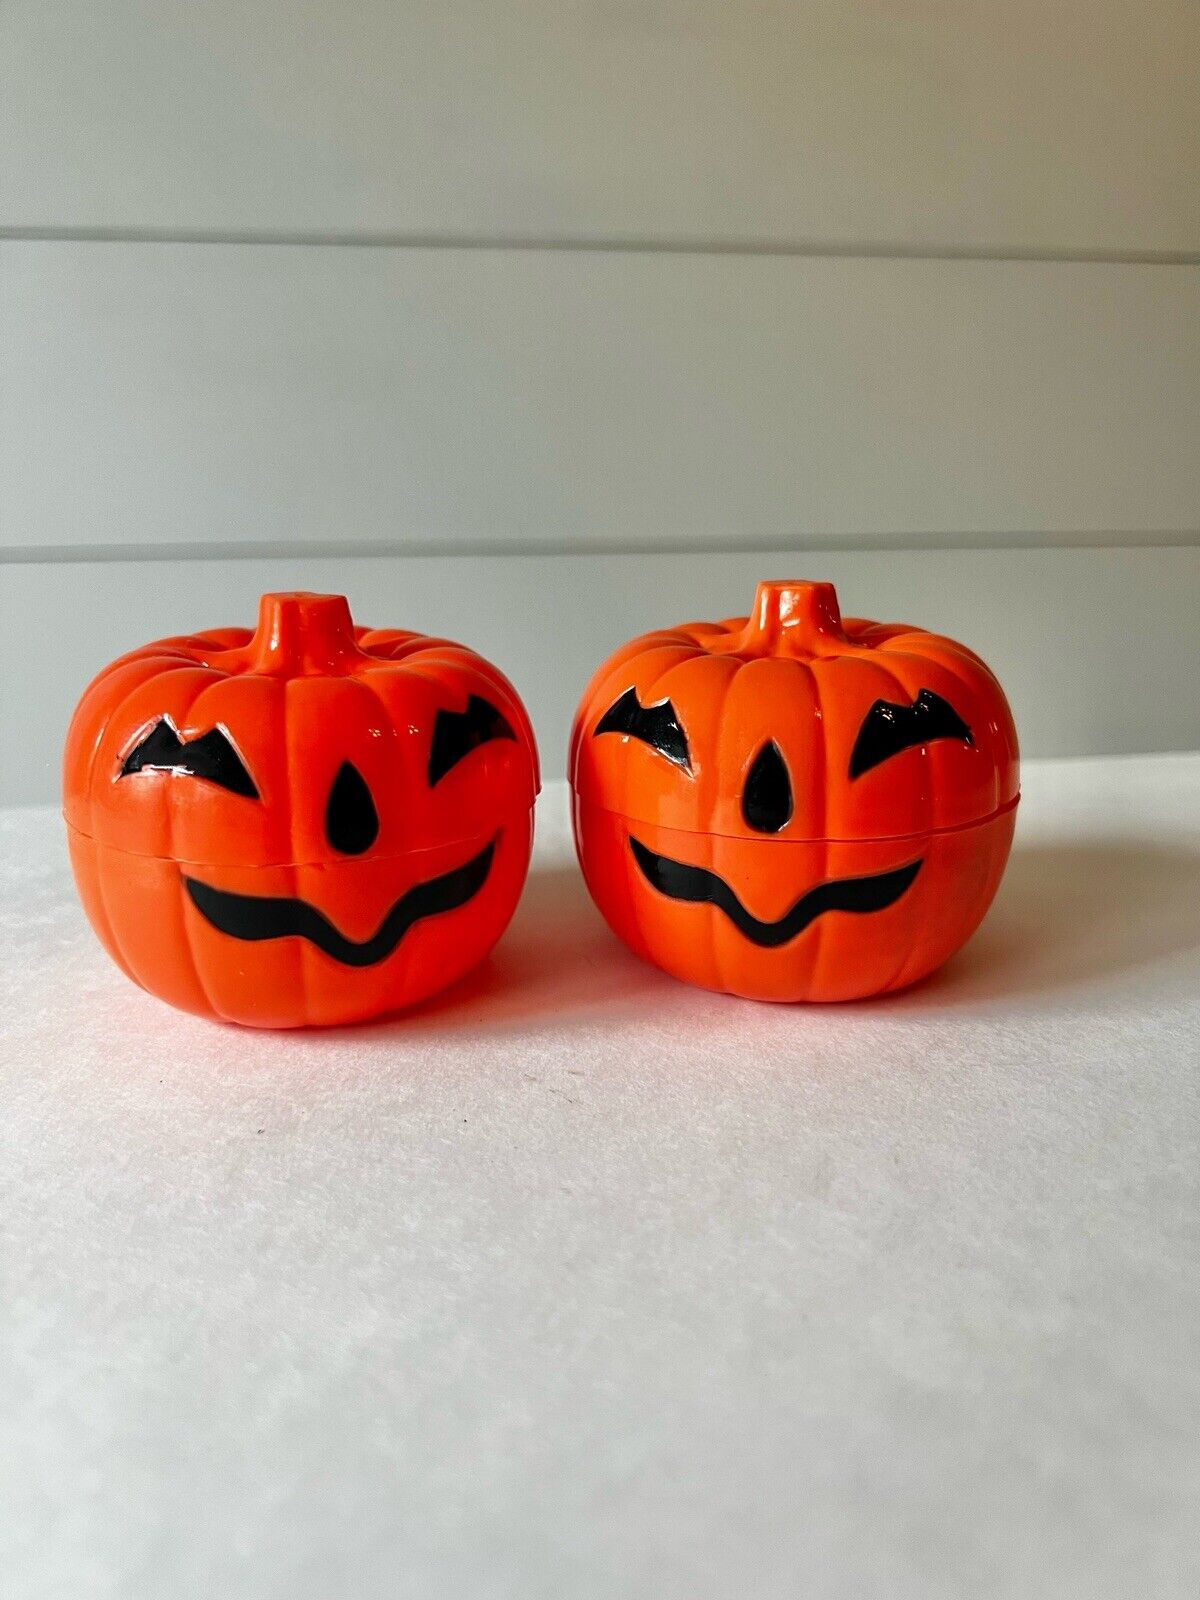 2 Vintage 1995 Spearhead Pumpkin Candy Container Blow Mold Halloween Decor